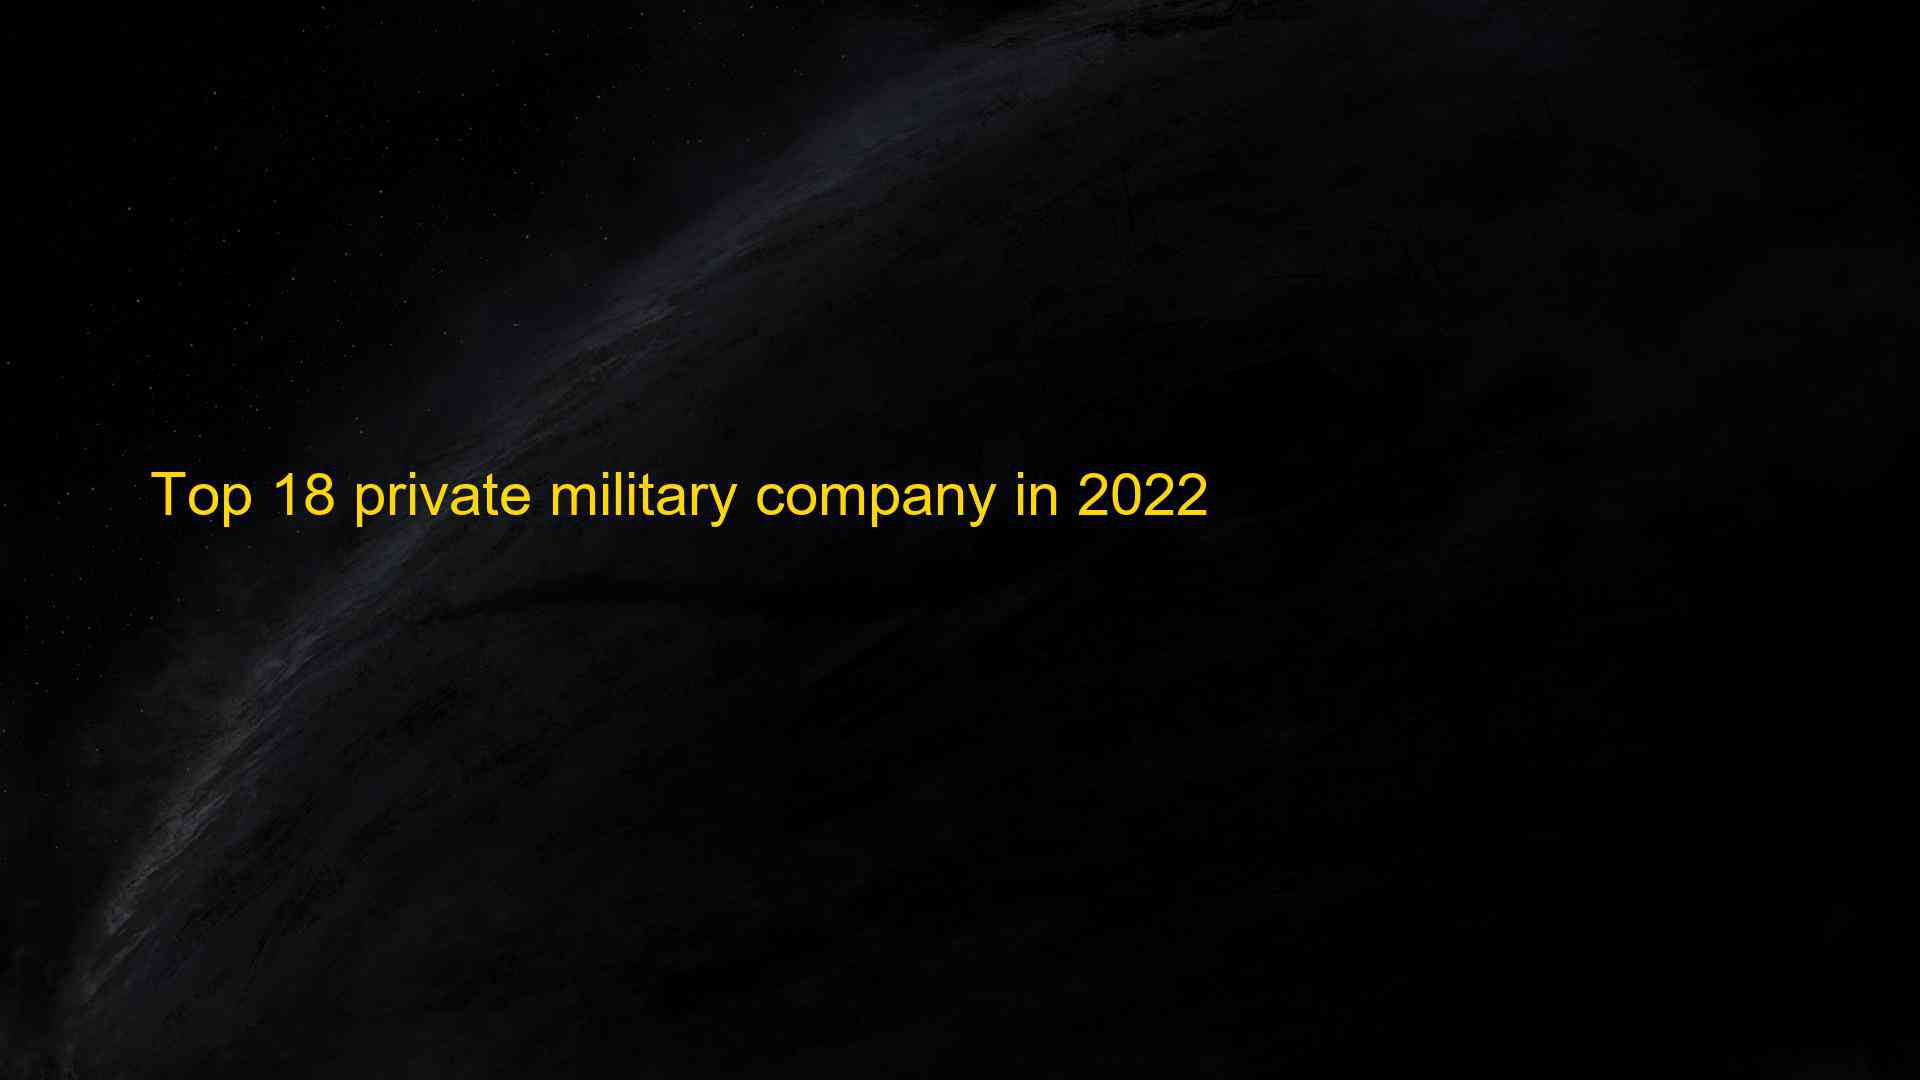 Top 18 private military company in 2022 1660032500